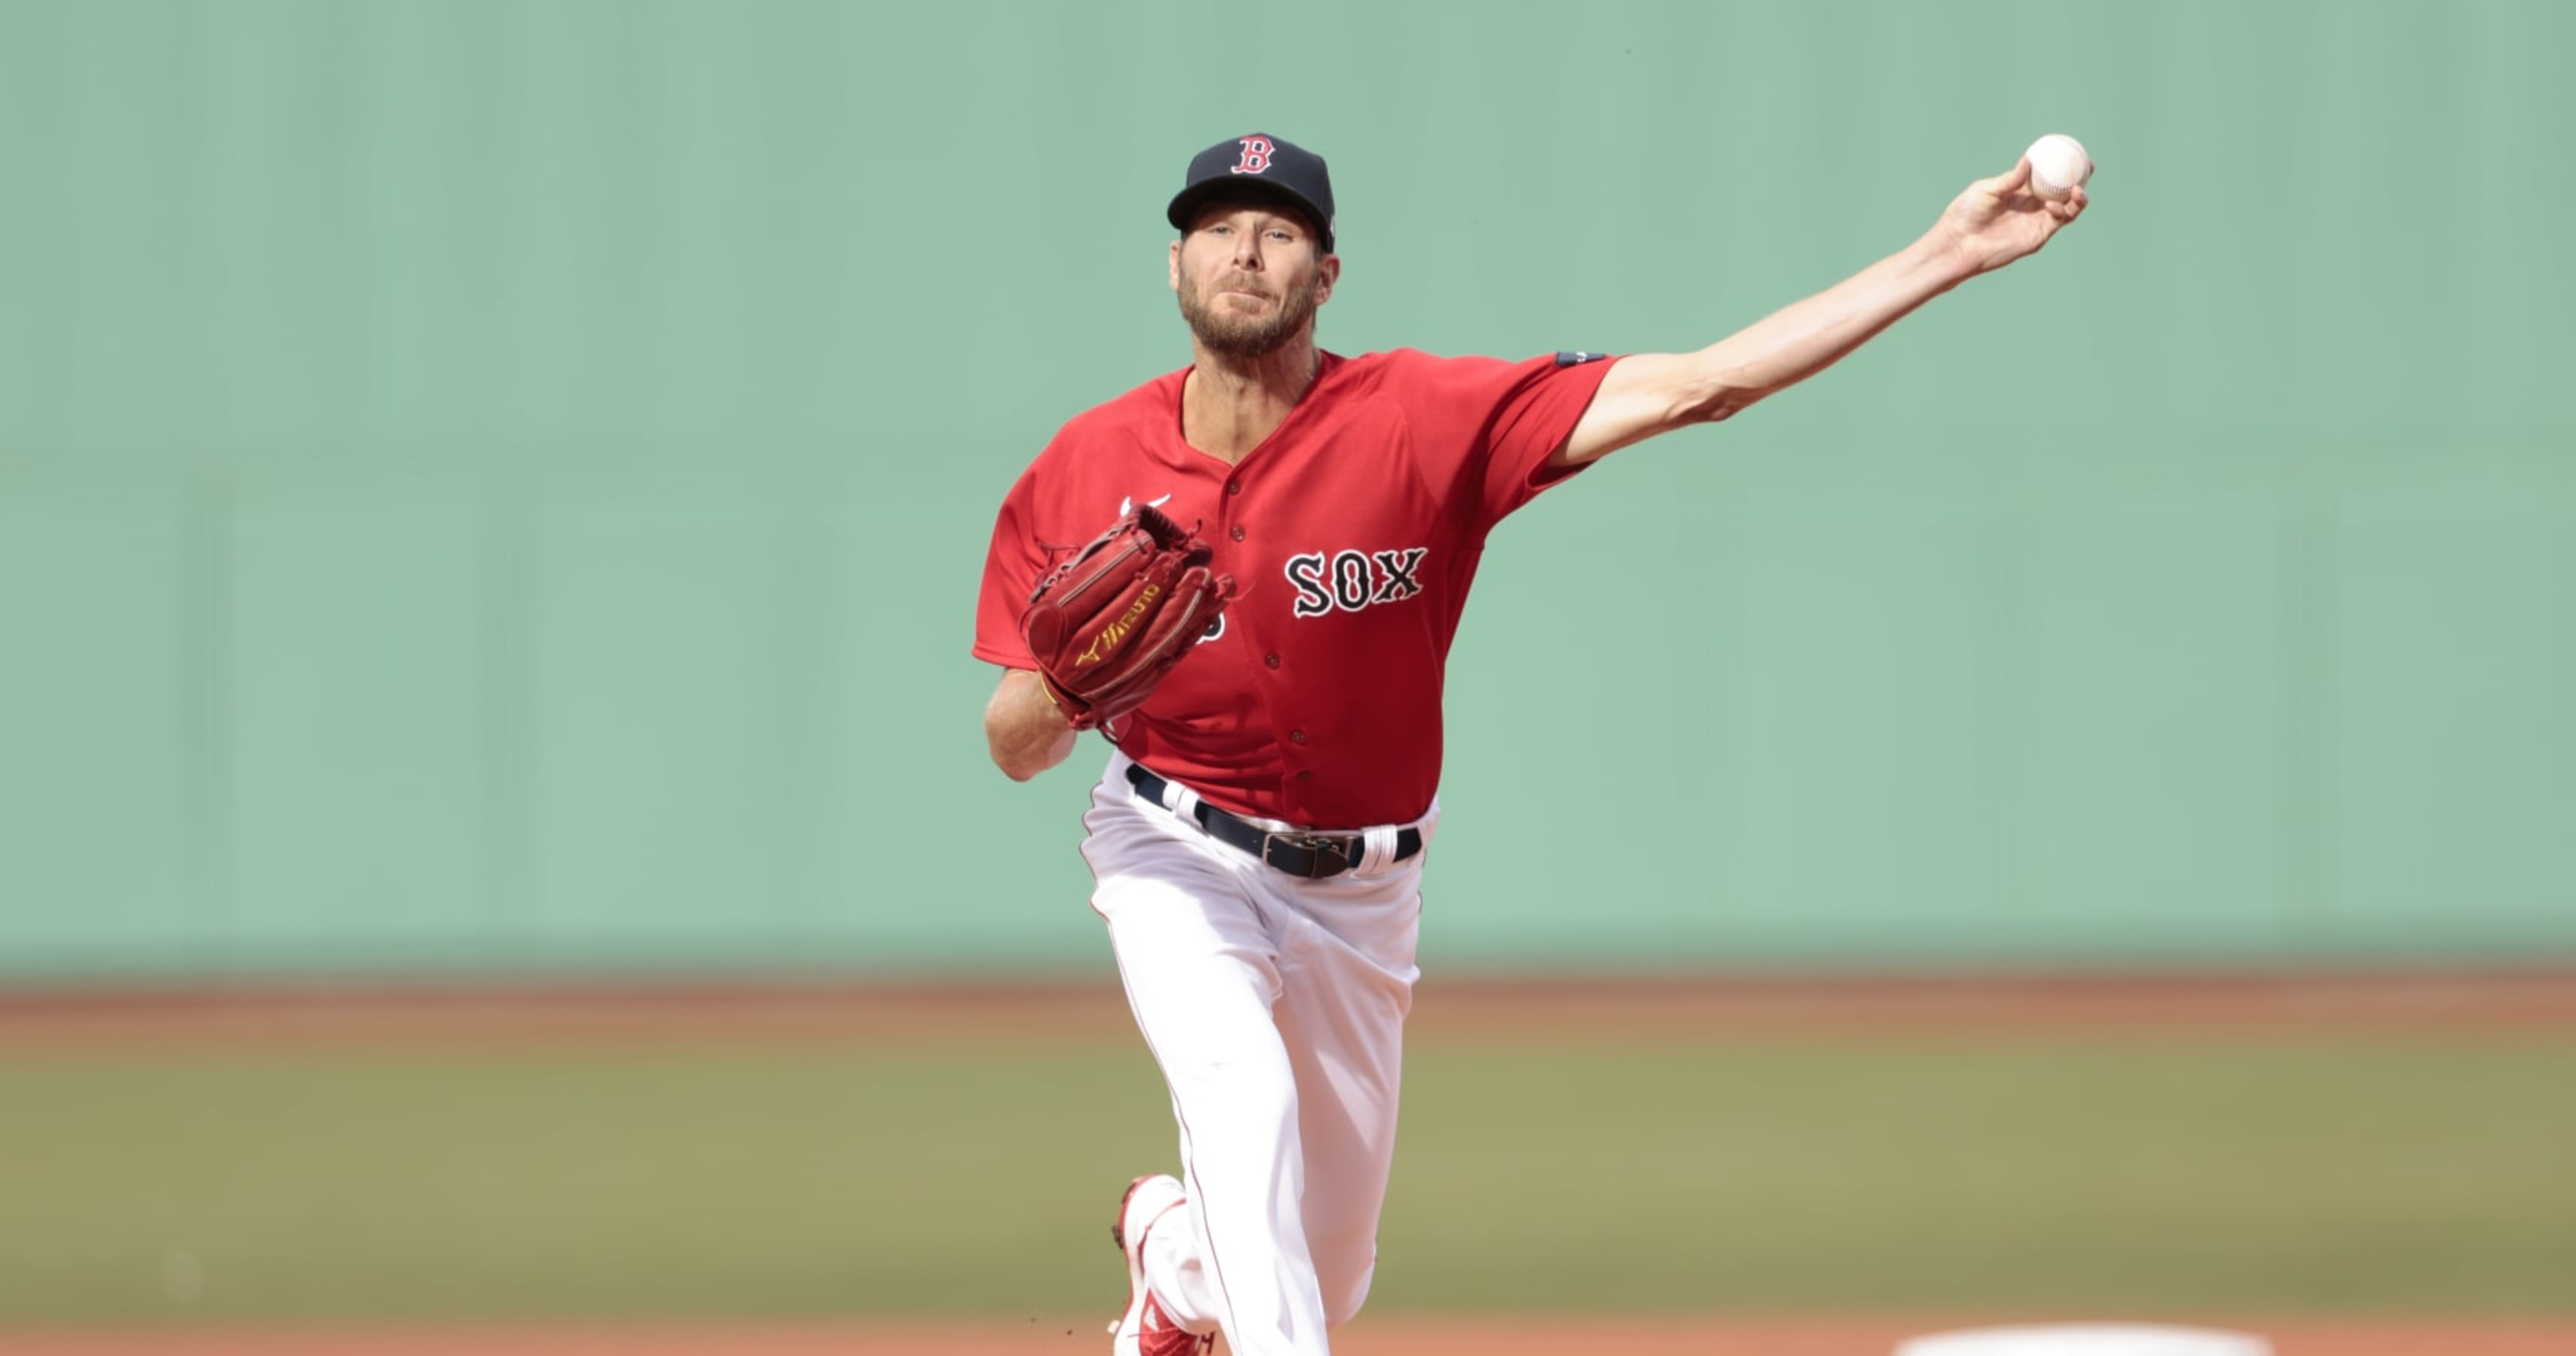 Reports: Chris Sale, Red Sox in agreement on $145-million extension